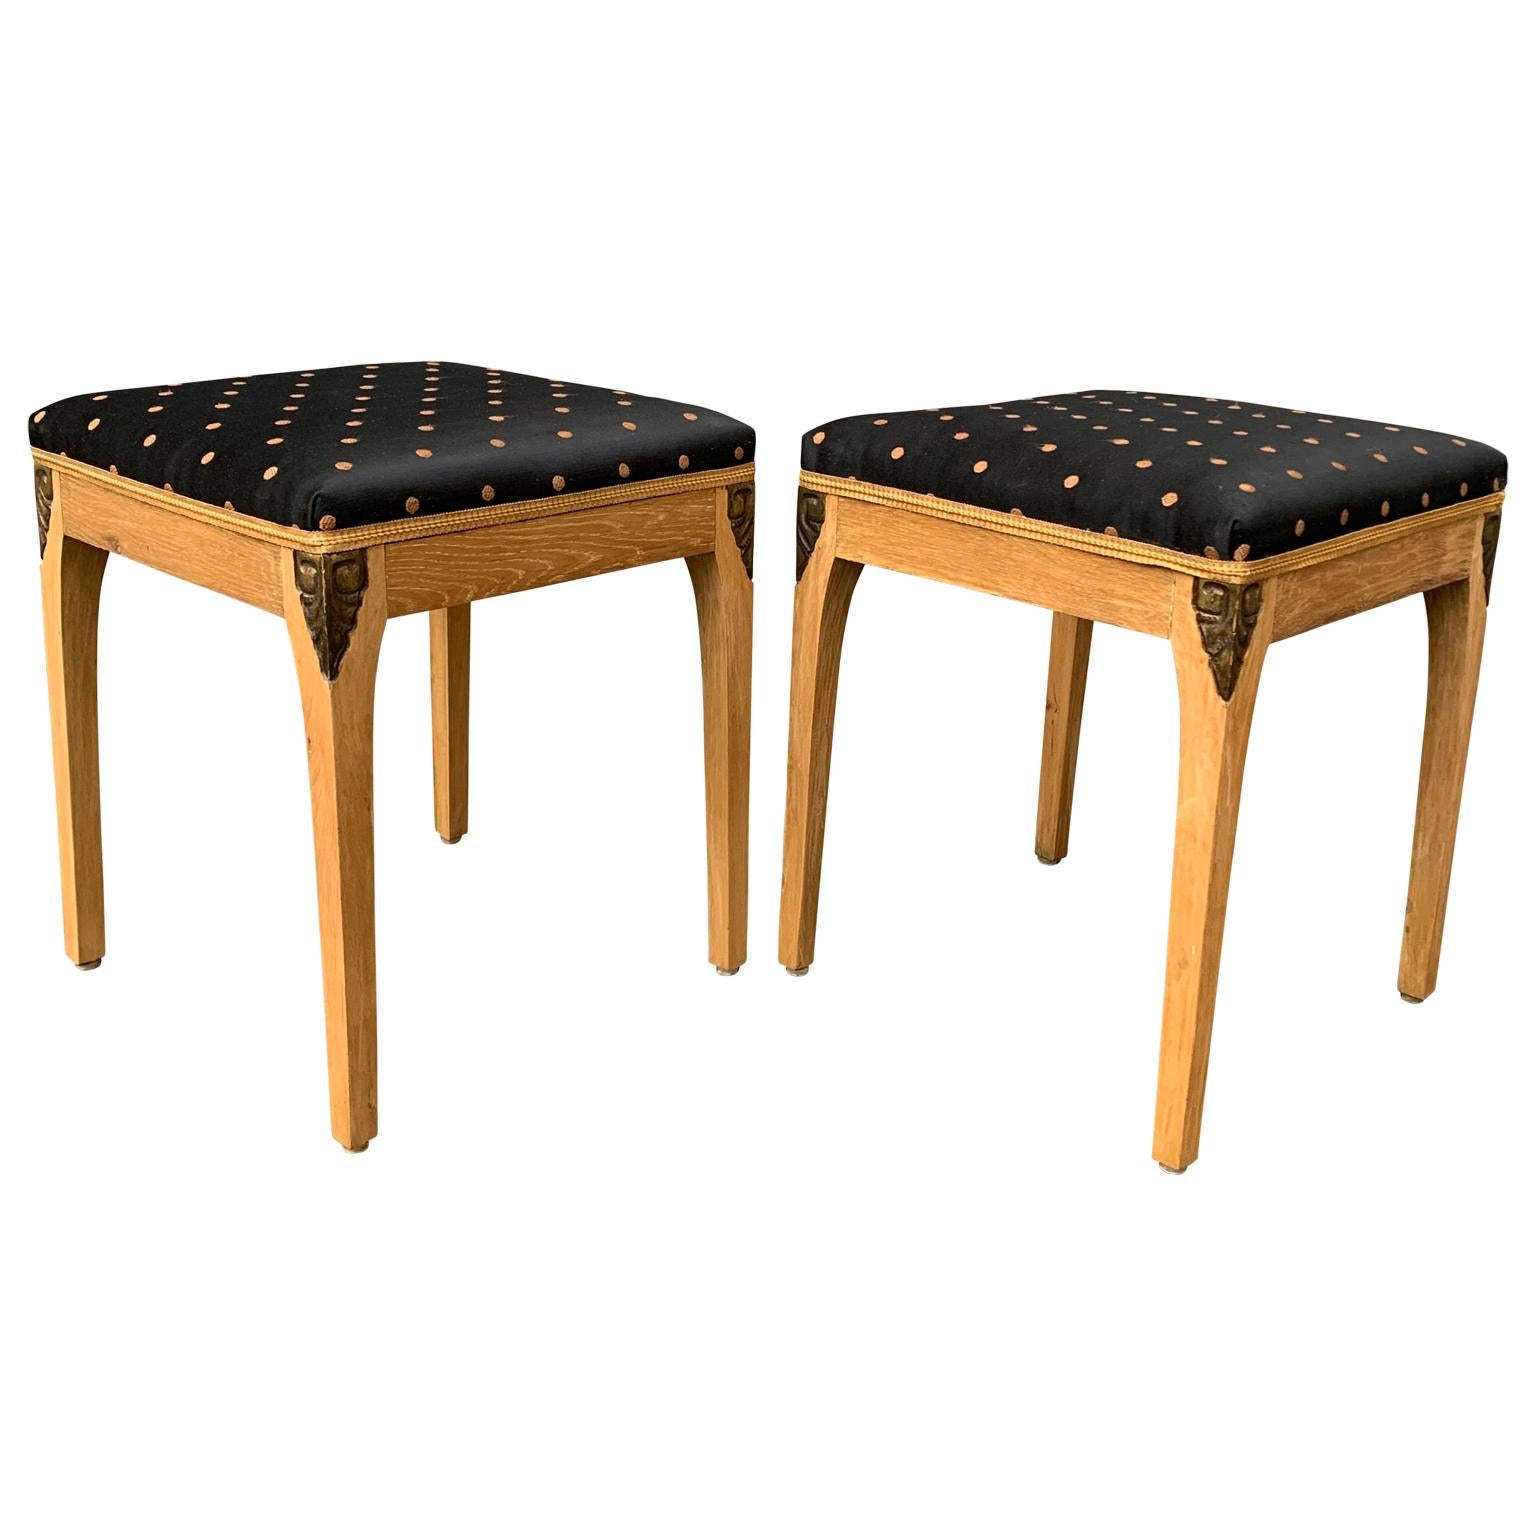 Pair of Swedish Light Wood Art Deco Stools, 1920s In Good Condition For Sale In Haddonfield, NJ